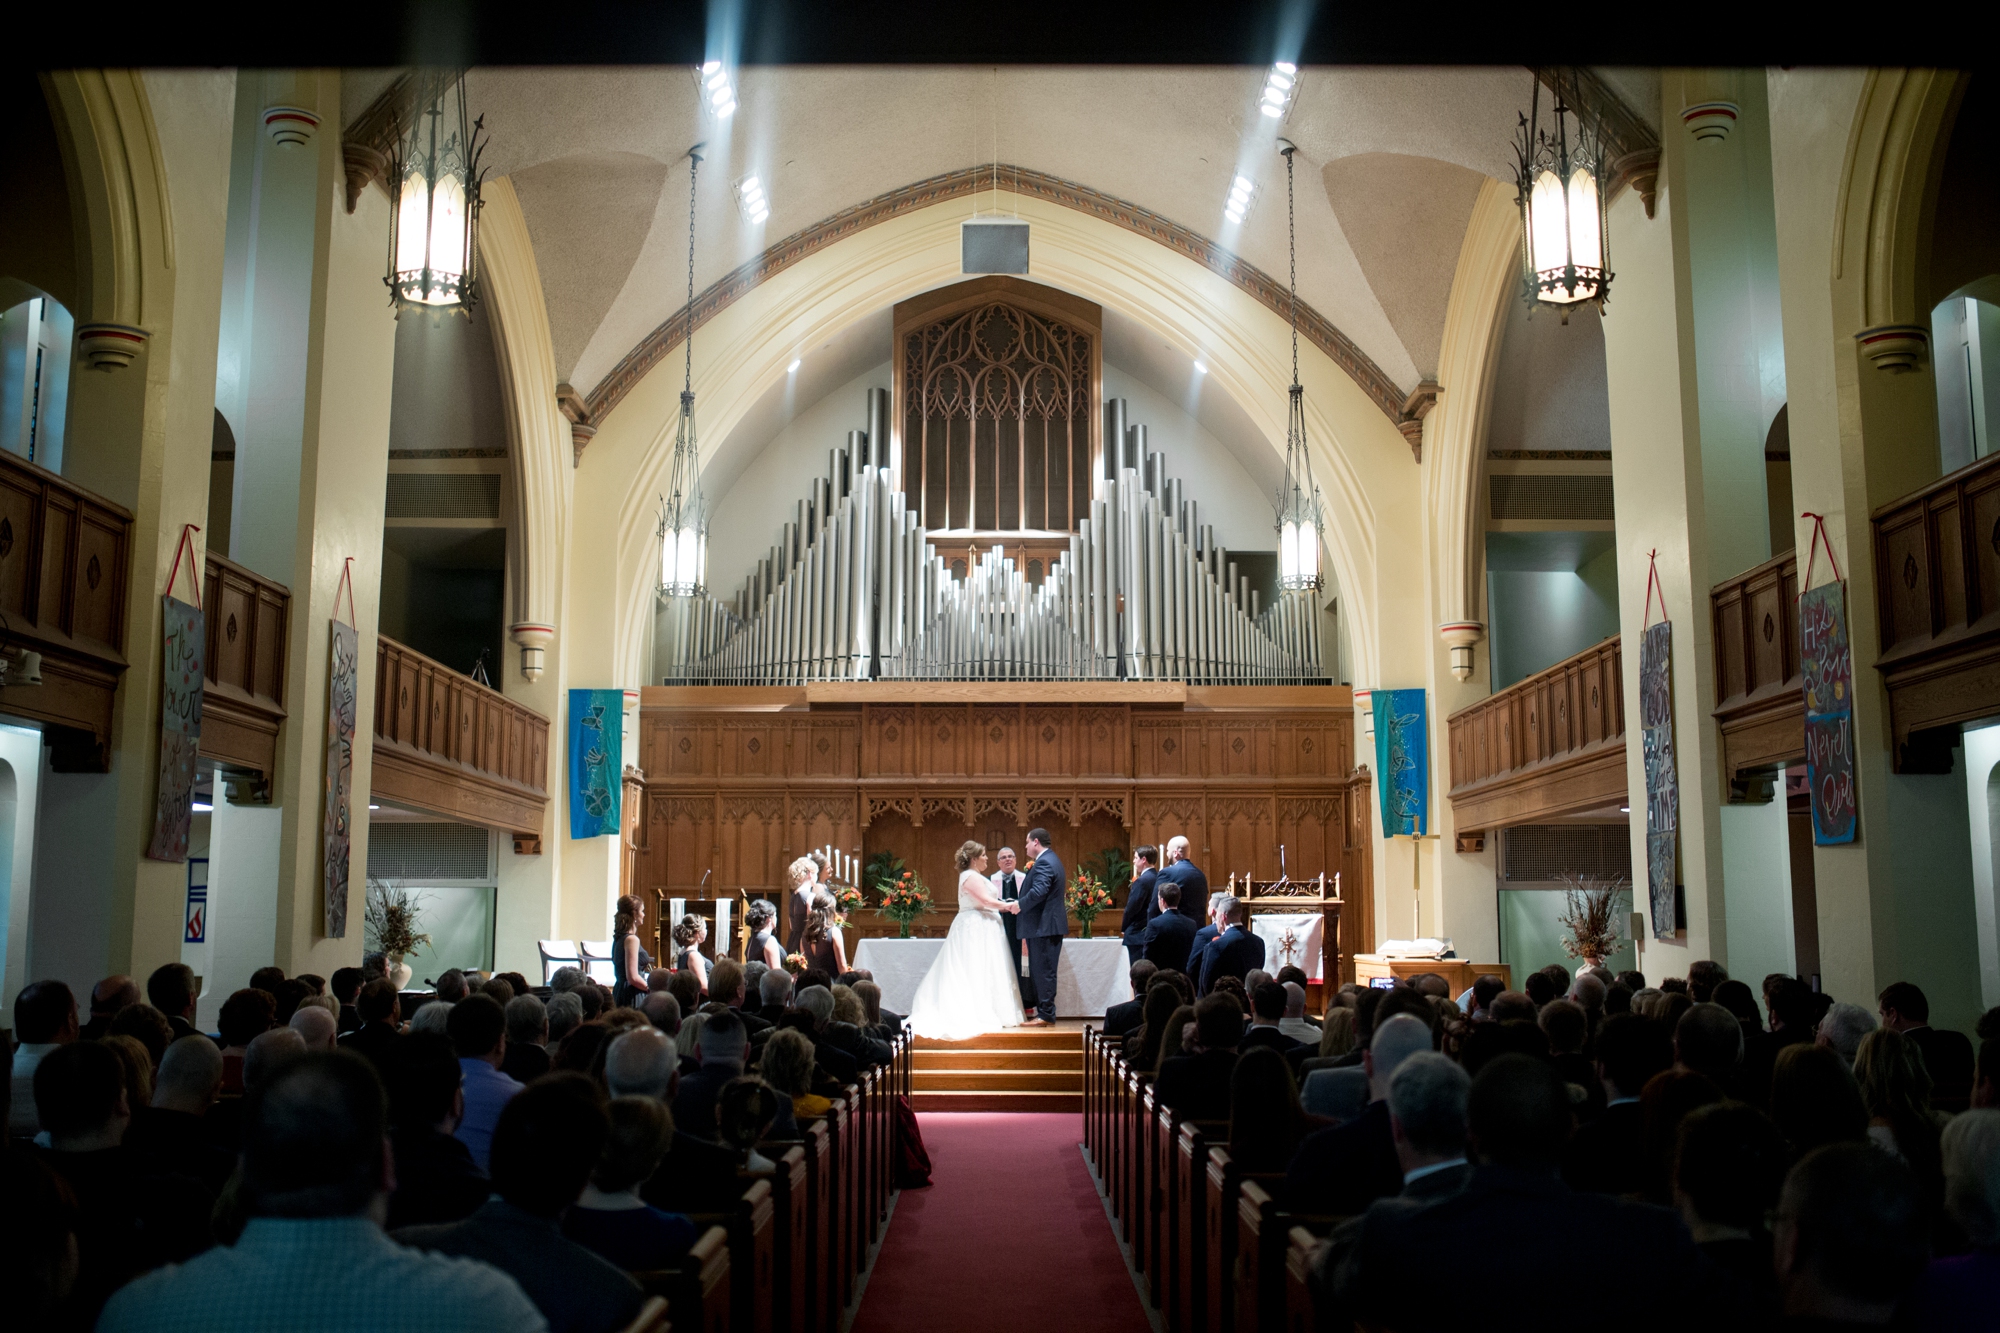 westminster college wedding photos, palermo center wedding pictures, wallace memorial chapel wedding photos, new wilmington wedding photographer